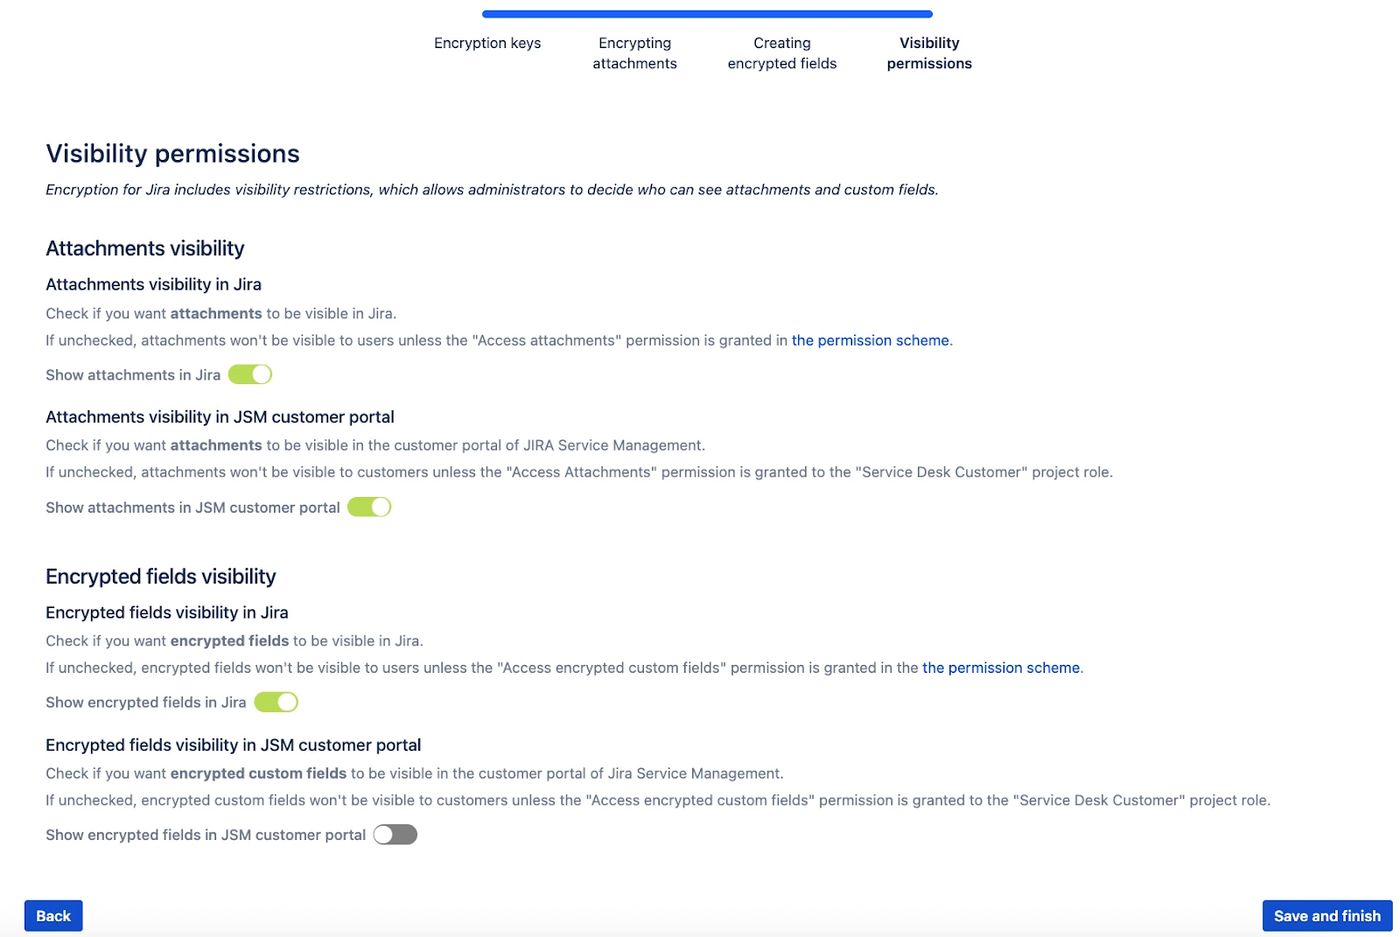 a screenshot of the Encryption for Jira app showing visibility permissions settings